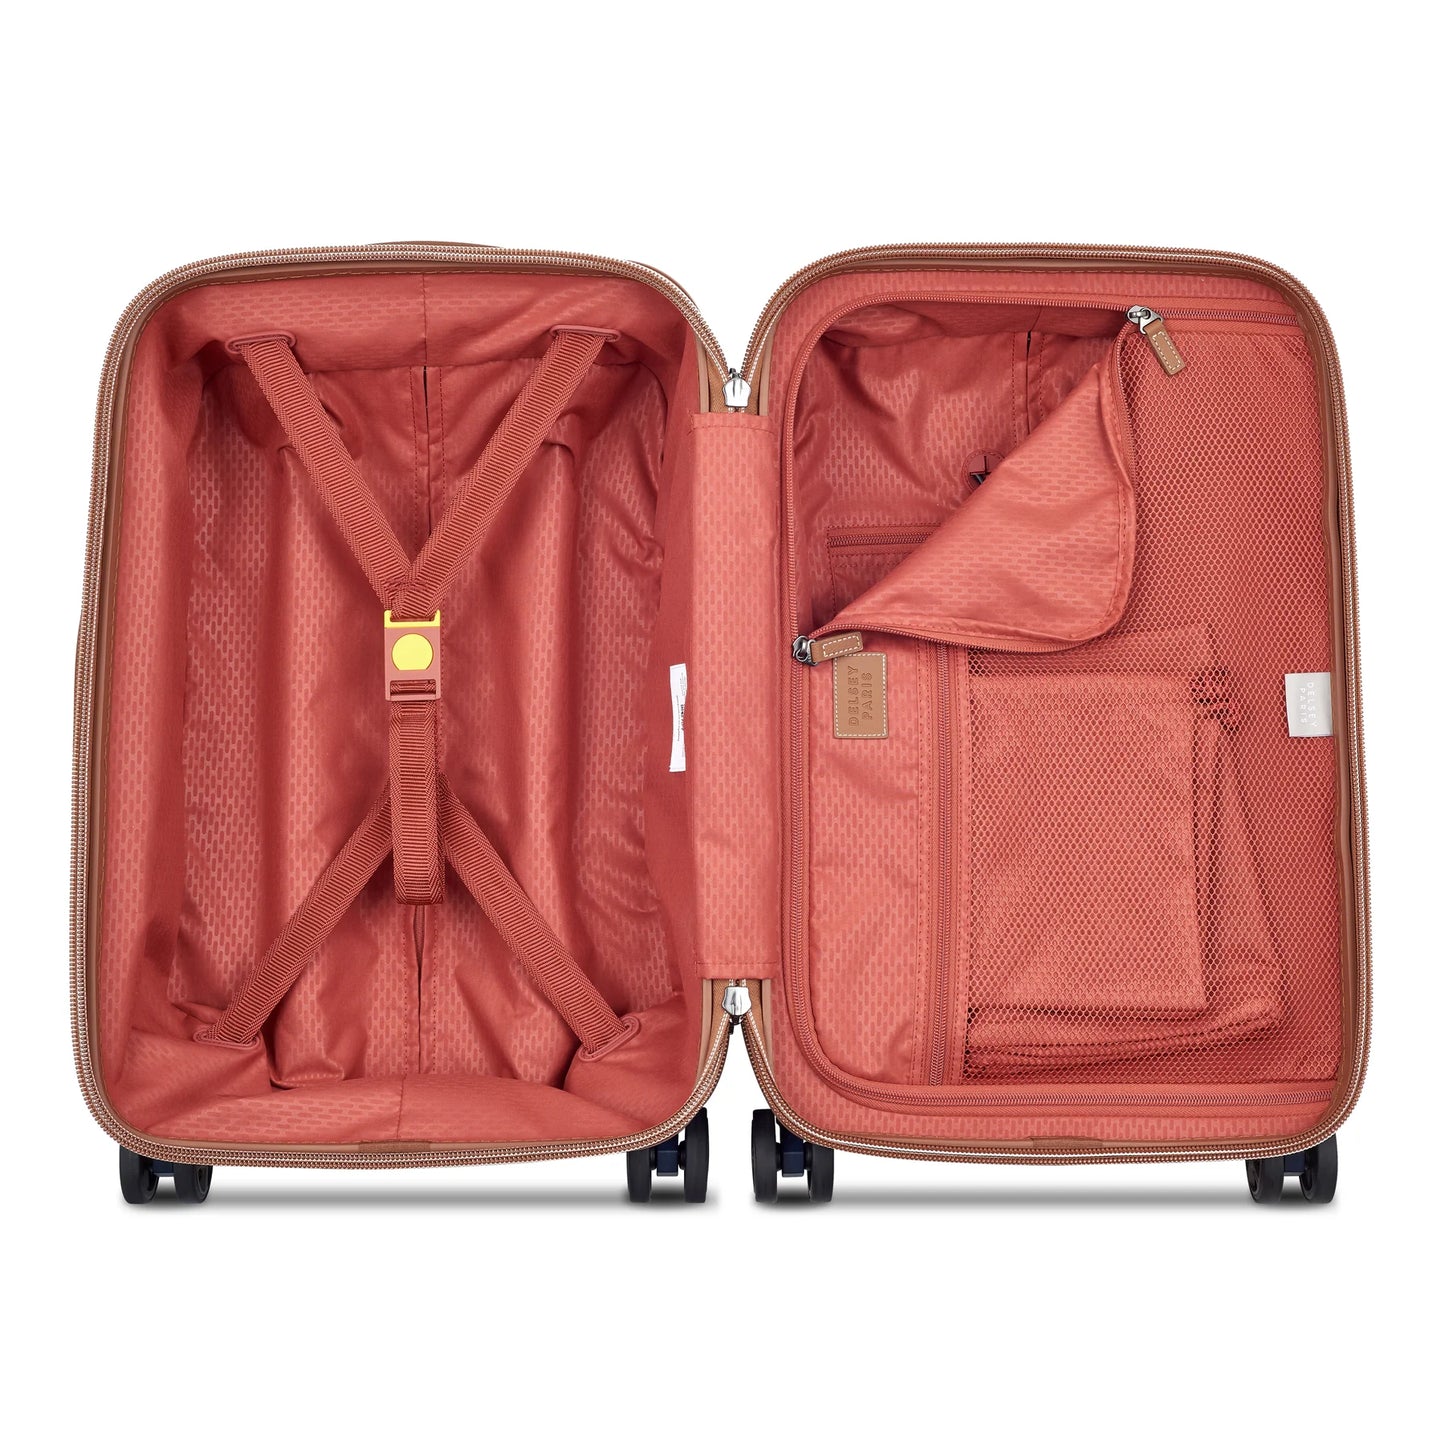 DELSEY CHATELET AIR 2.0 55CM BUSINESS TROLLEY CASE ANGORA